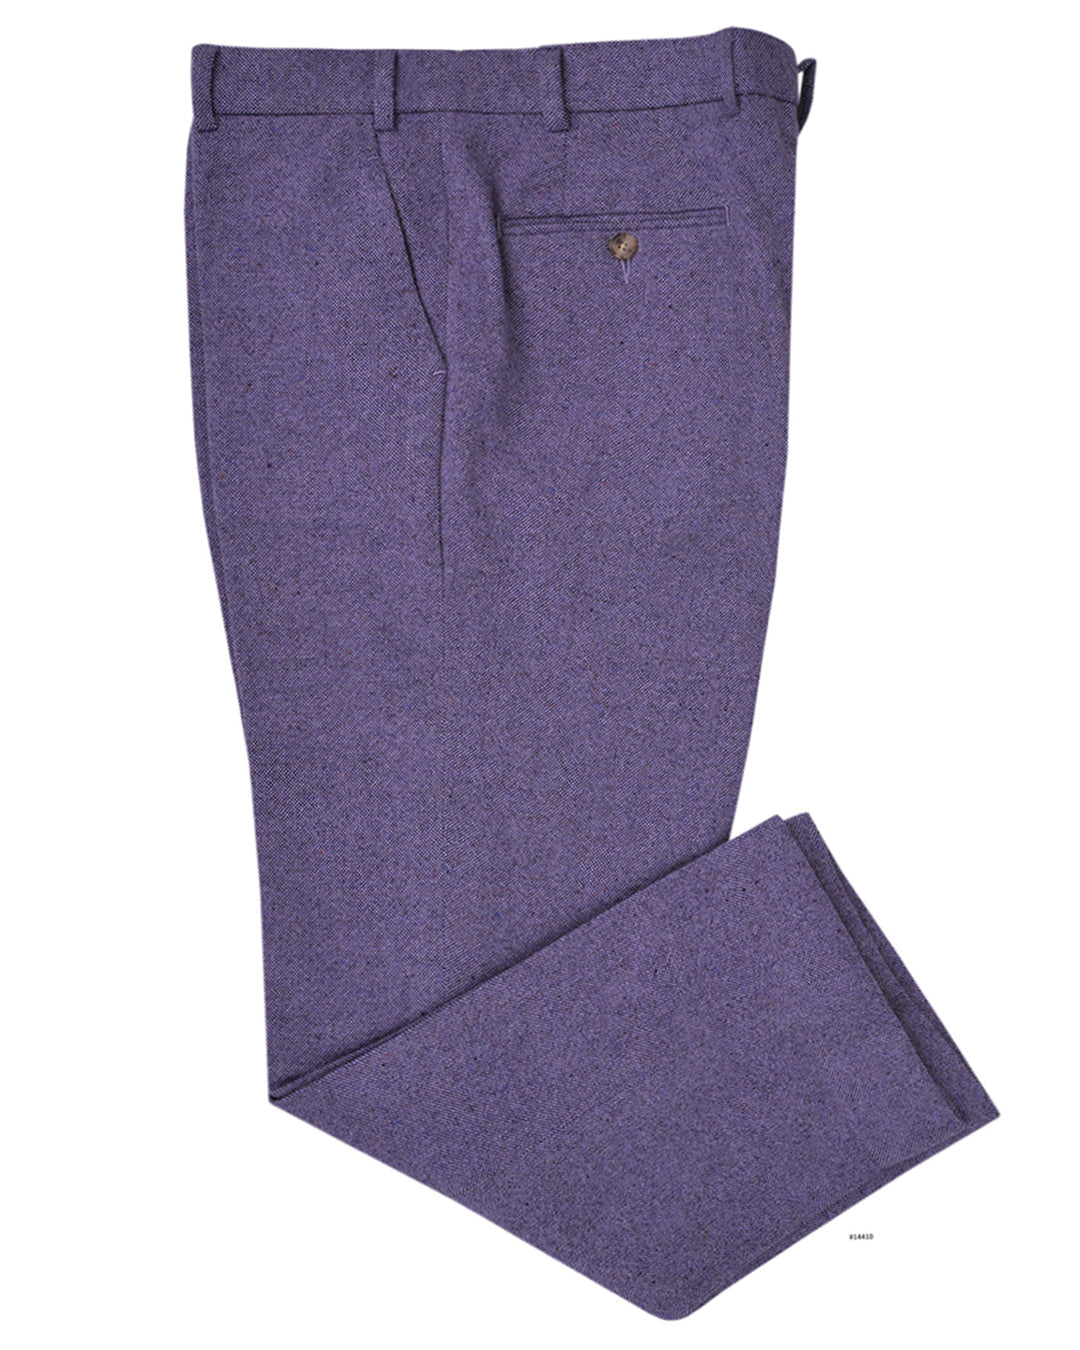 Holland & Sherry Tweed Wool Multicolor Purple With Light Purple With Red Point Tweed